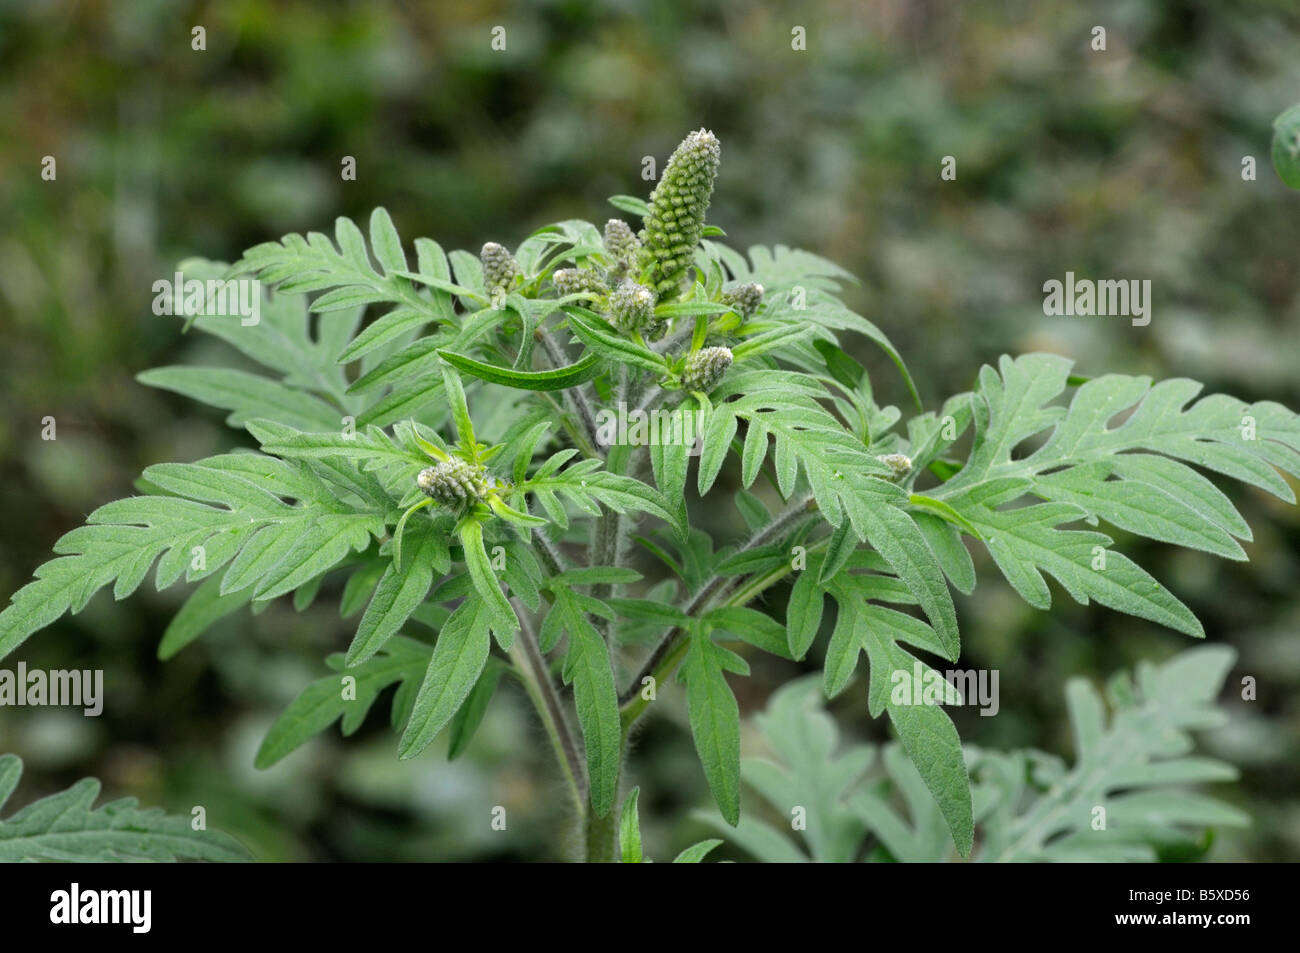 Annual Ragweed, Common Ragweed (Ambrosia artemisiifolia). Young plant with flower buds Stock Photo